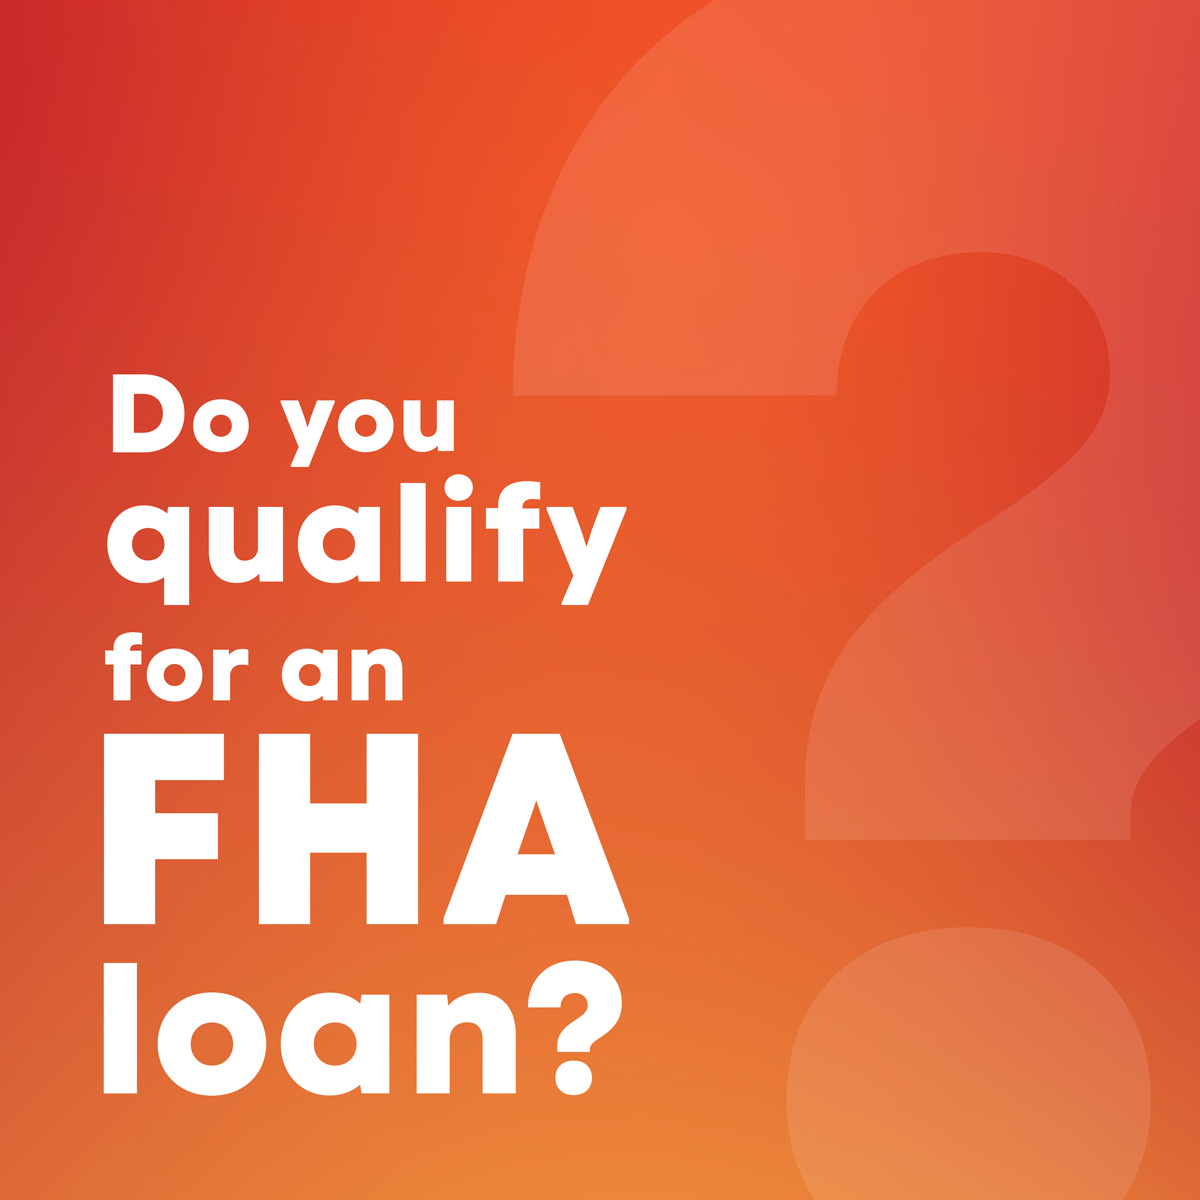 Worried about your credit, but desperate for your next move? An FHA loan may be the perfect solution for you! Contact us today to find out if you're ready to start the house hunt. #FirstTimeHomeBuyer #badcredit #newhome #realestate #rentvsown #buildequity